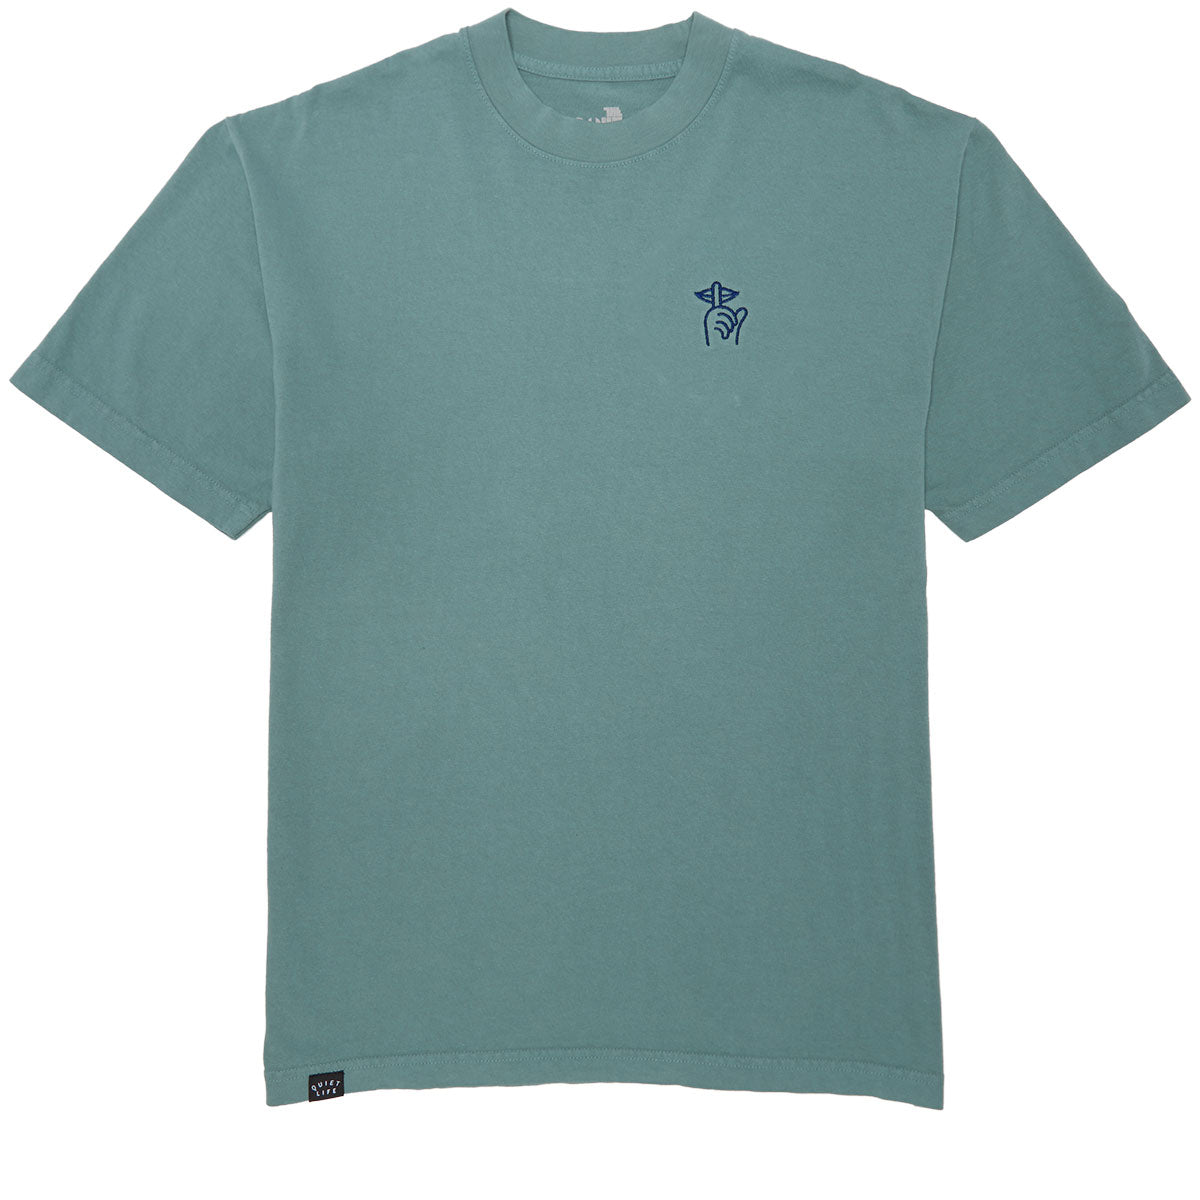 The Quiet Life Shhh Embroideree T-Shirt - Mist Green image 1